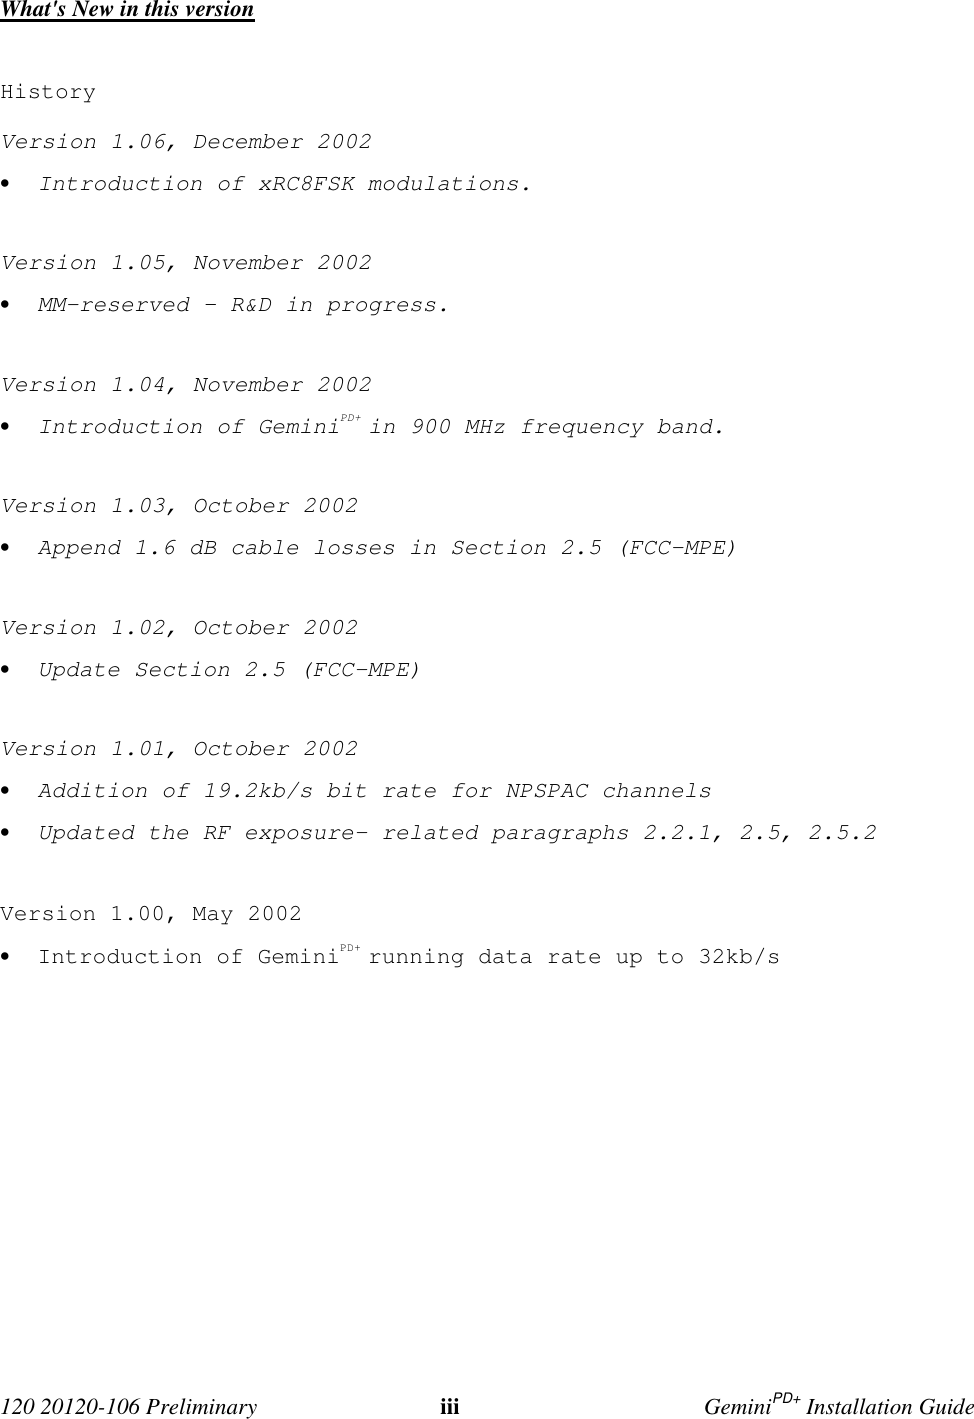  120 20120-106 Preliminary iii GeminiPD+ Installation GuideWhat&apos;s New in this versionHistoryVersion 1.06, December 2002• Introduction of xRC8FSK modulations.Version 1.05, November 2002• MM-reserved – R&amp;D in progress.Version 1.04, November 2002• Introduction of GeminiPD+ in 900 MHz frequency band.Version 1.03, October 2002• Append 1.6 dB cable losses in Section 2.5 (FCC-MPE)Version 1.02, October 2002• Update Section 2.5 (FCC-MPE)Version 1.01, October 2002• Addition of 19.2kb/s bit rate for NPSPAC channels• Updated the RF exposure- related paragraphs 2.2.1, 2.5, 2.5.2Version 1.00, May 2002• Introduction of GeminiPD+ running data rate up to 32kb/s